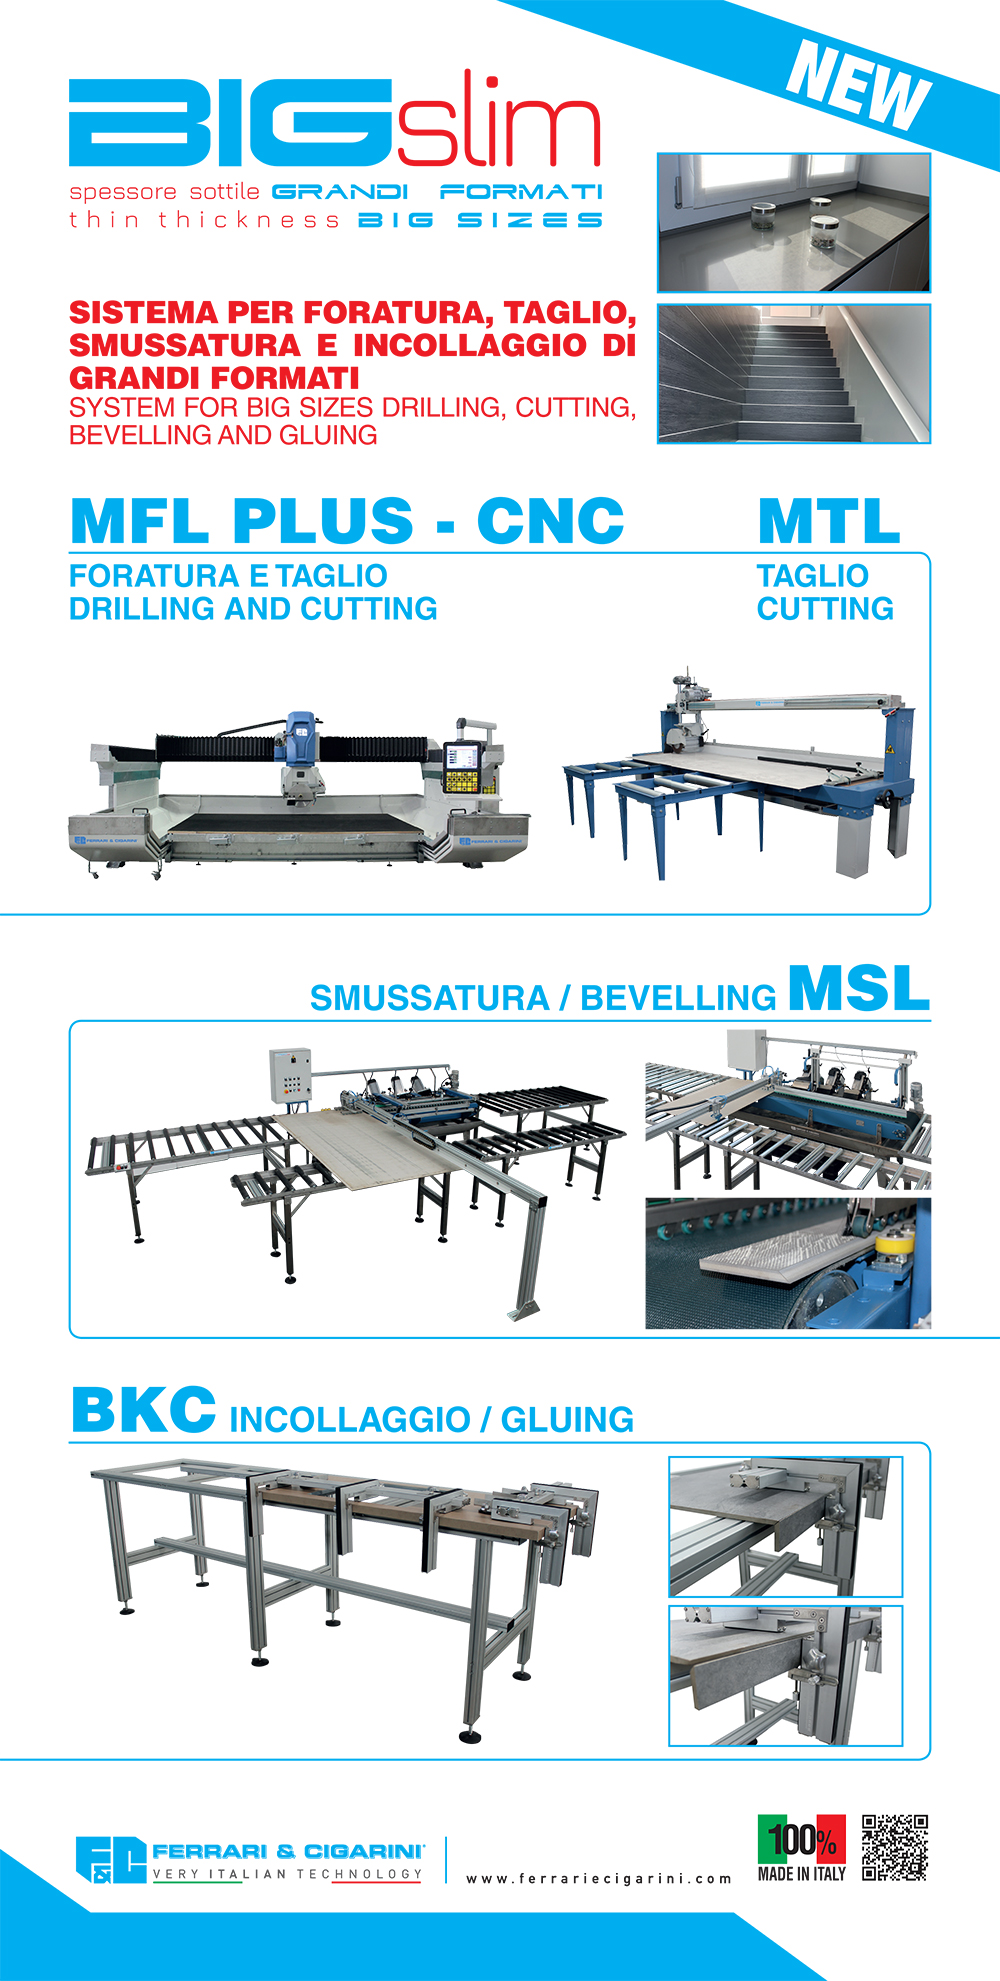 SYSTEM FOR BIG SIZES DRILLING, CUTTING, CHAMFERING AND GLUEING UP TO 360x160 CM